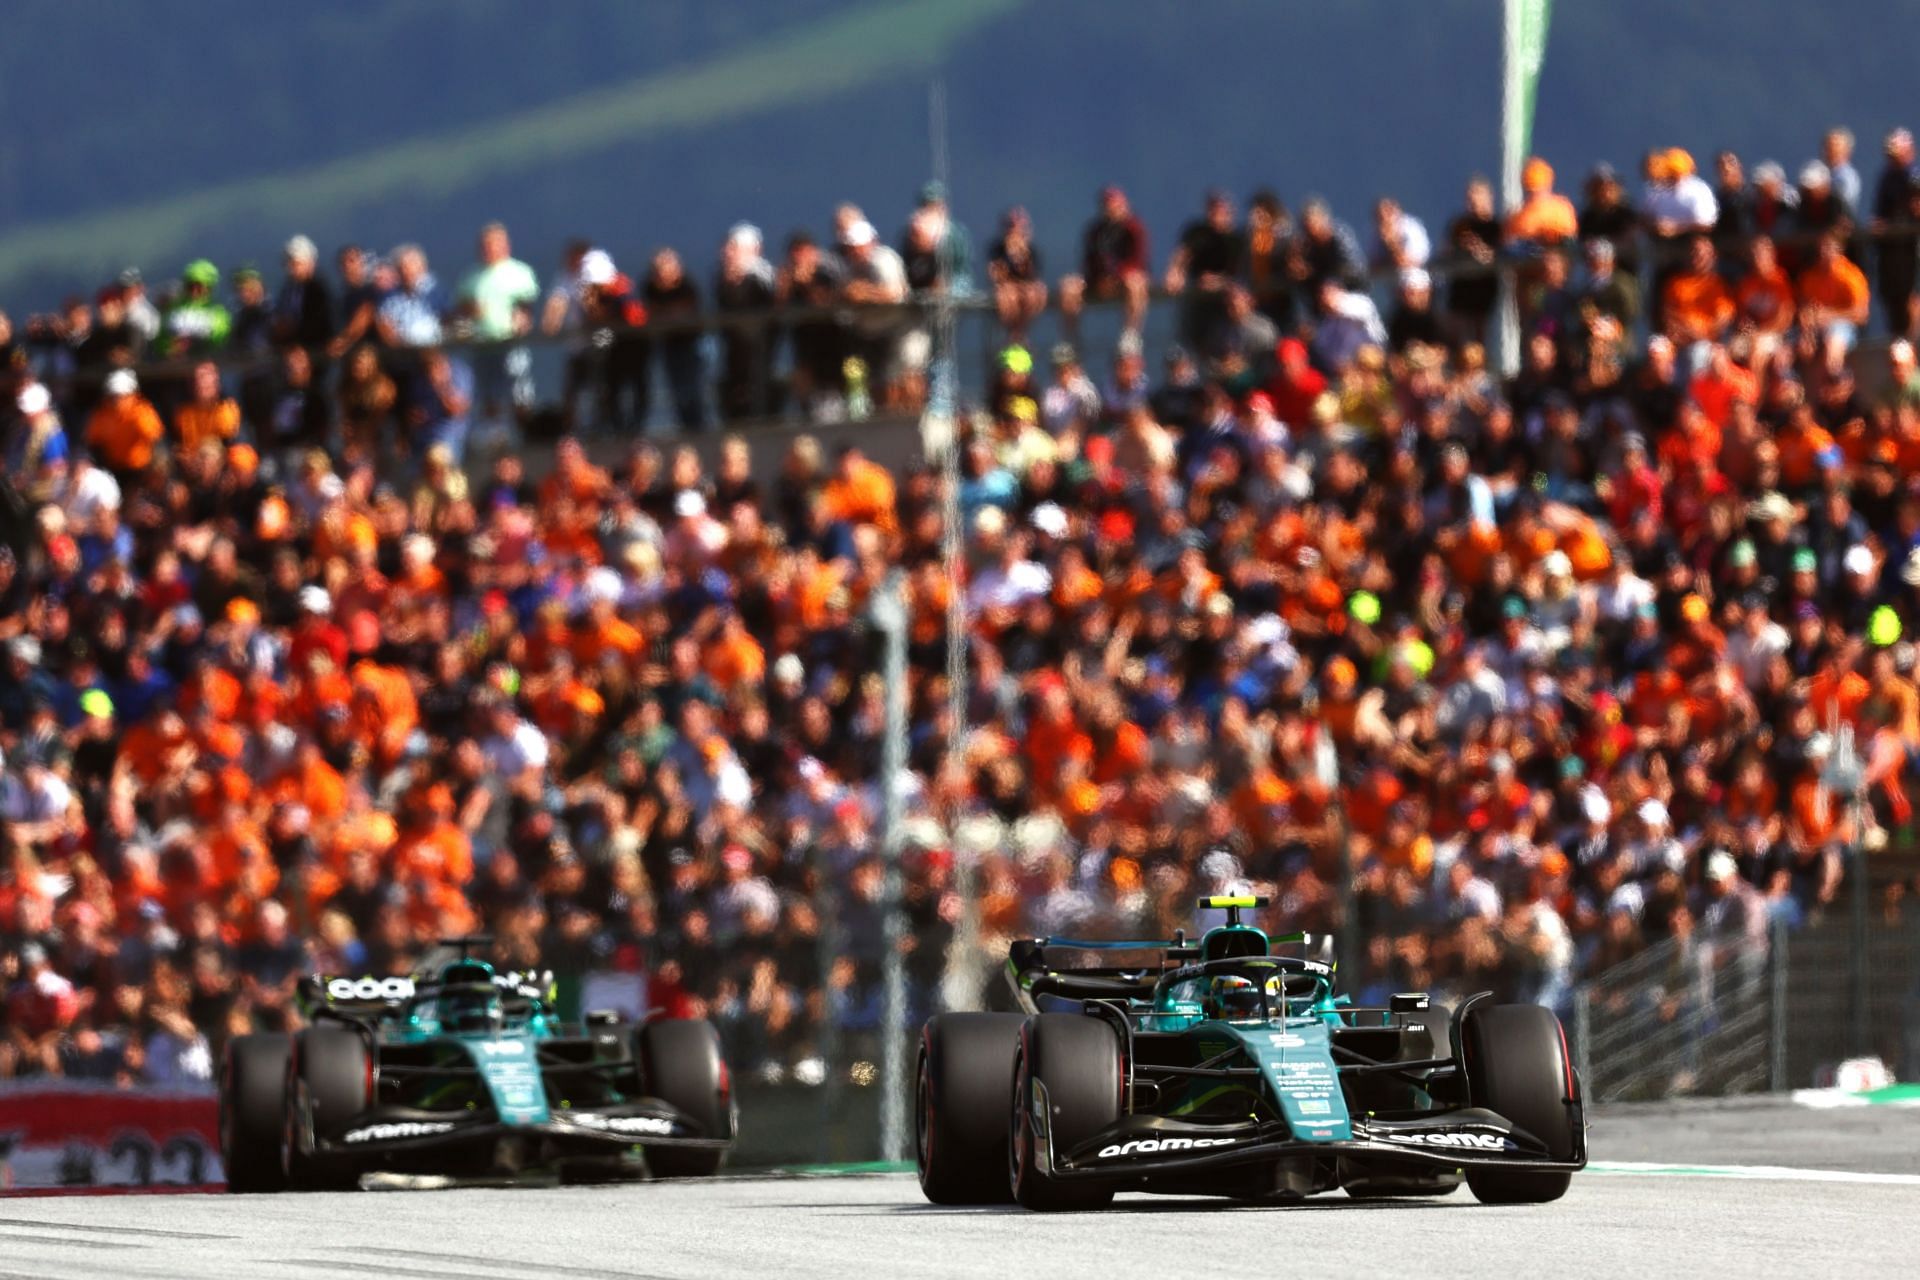 The two Aston Martin drivers were going at it in the 2022 F1 French GP